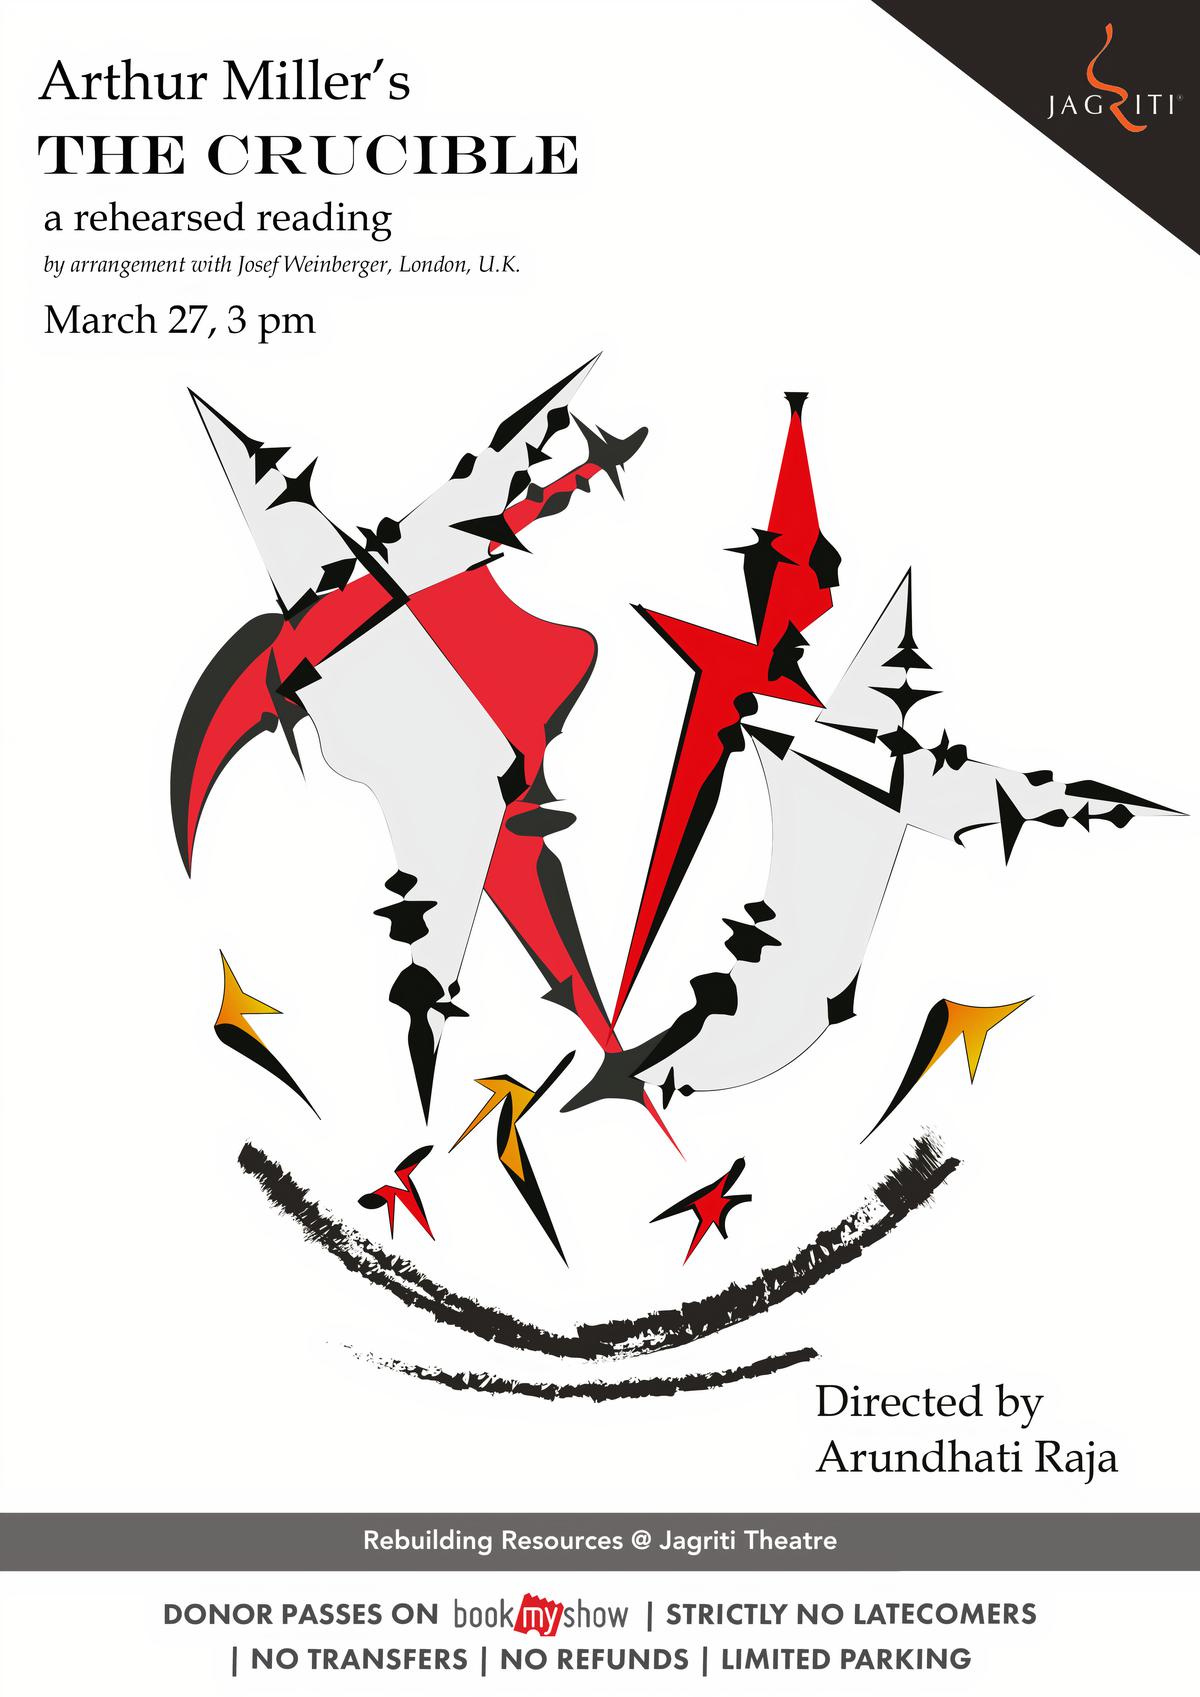 The Crucible- A Rehearsed Reading will be staged on March 27